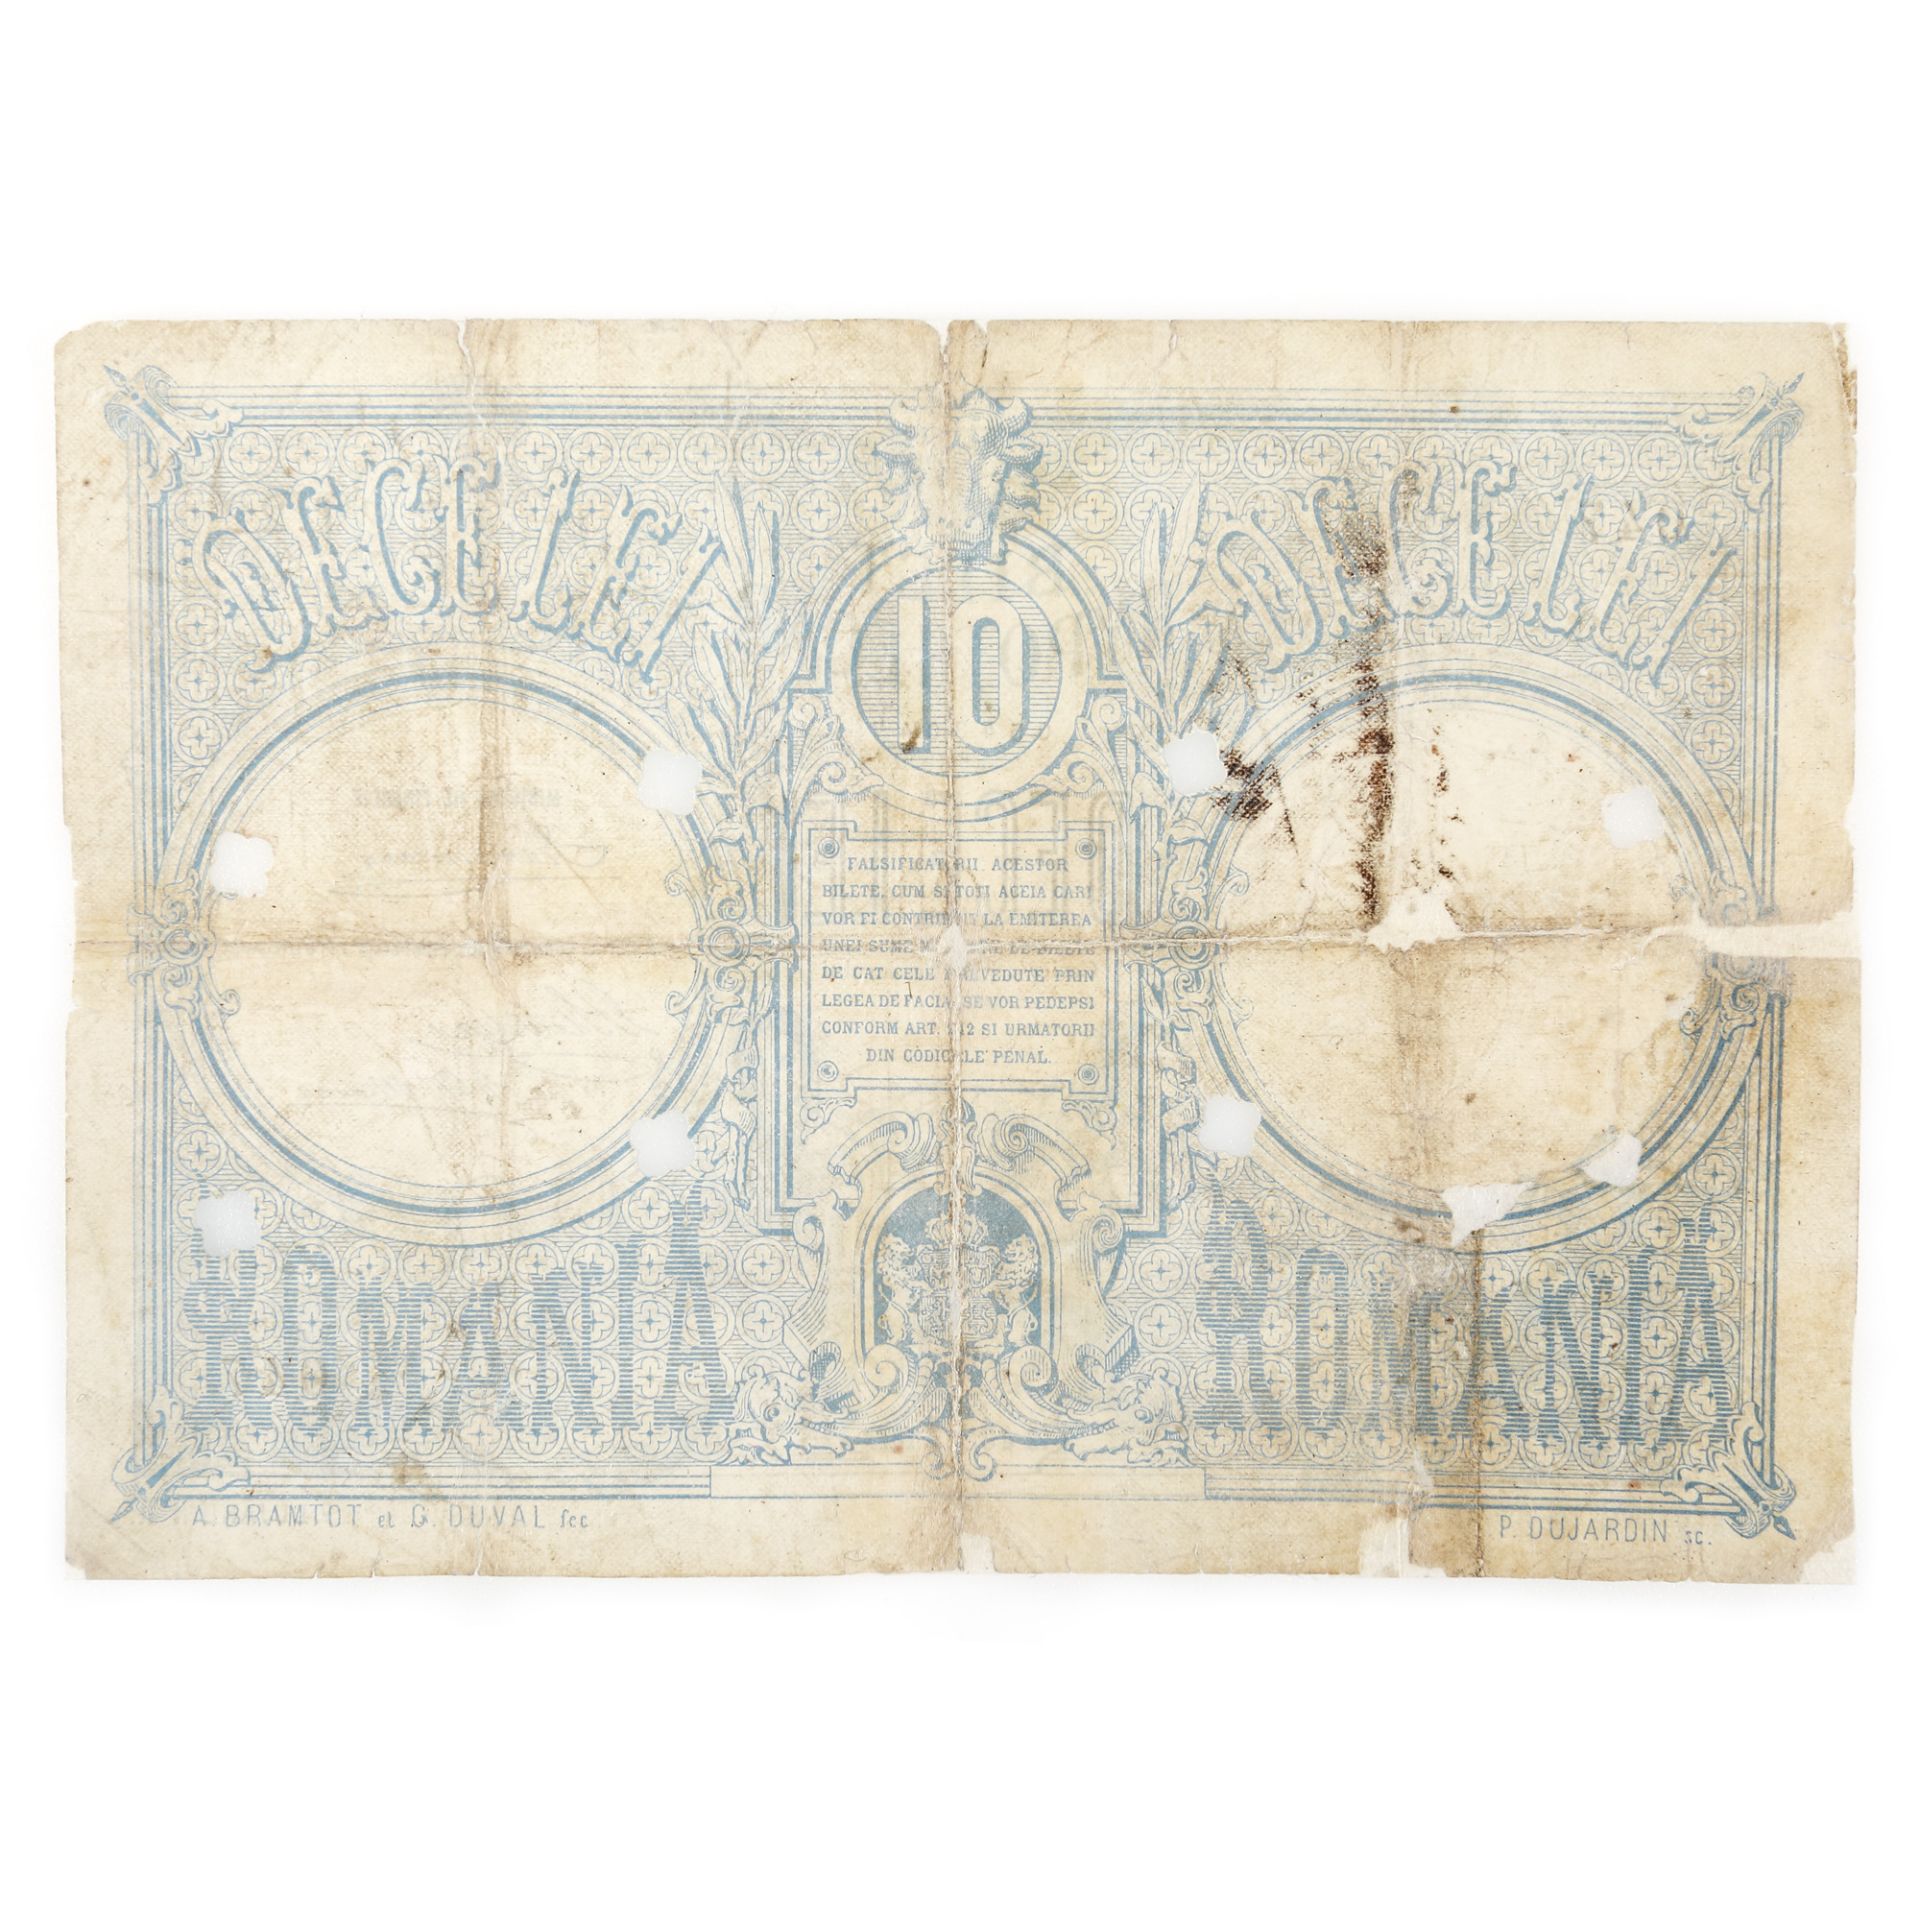 10 Lei 1877 banknote - mortgage note - Image 2 of 2